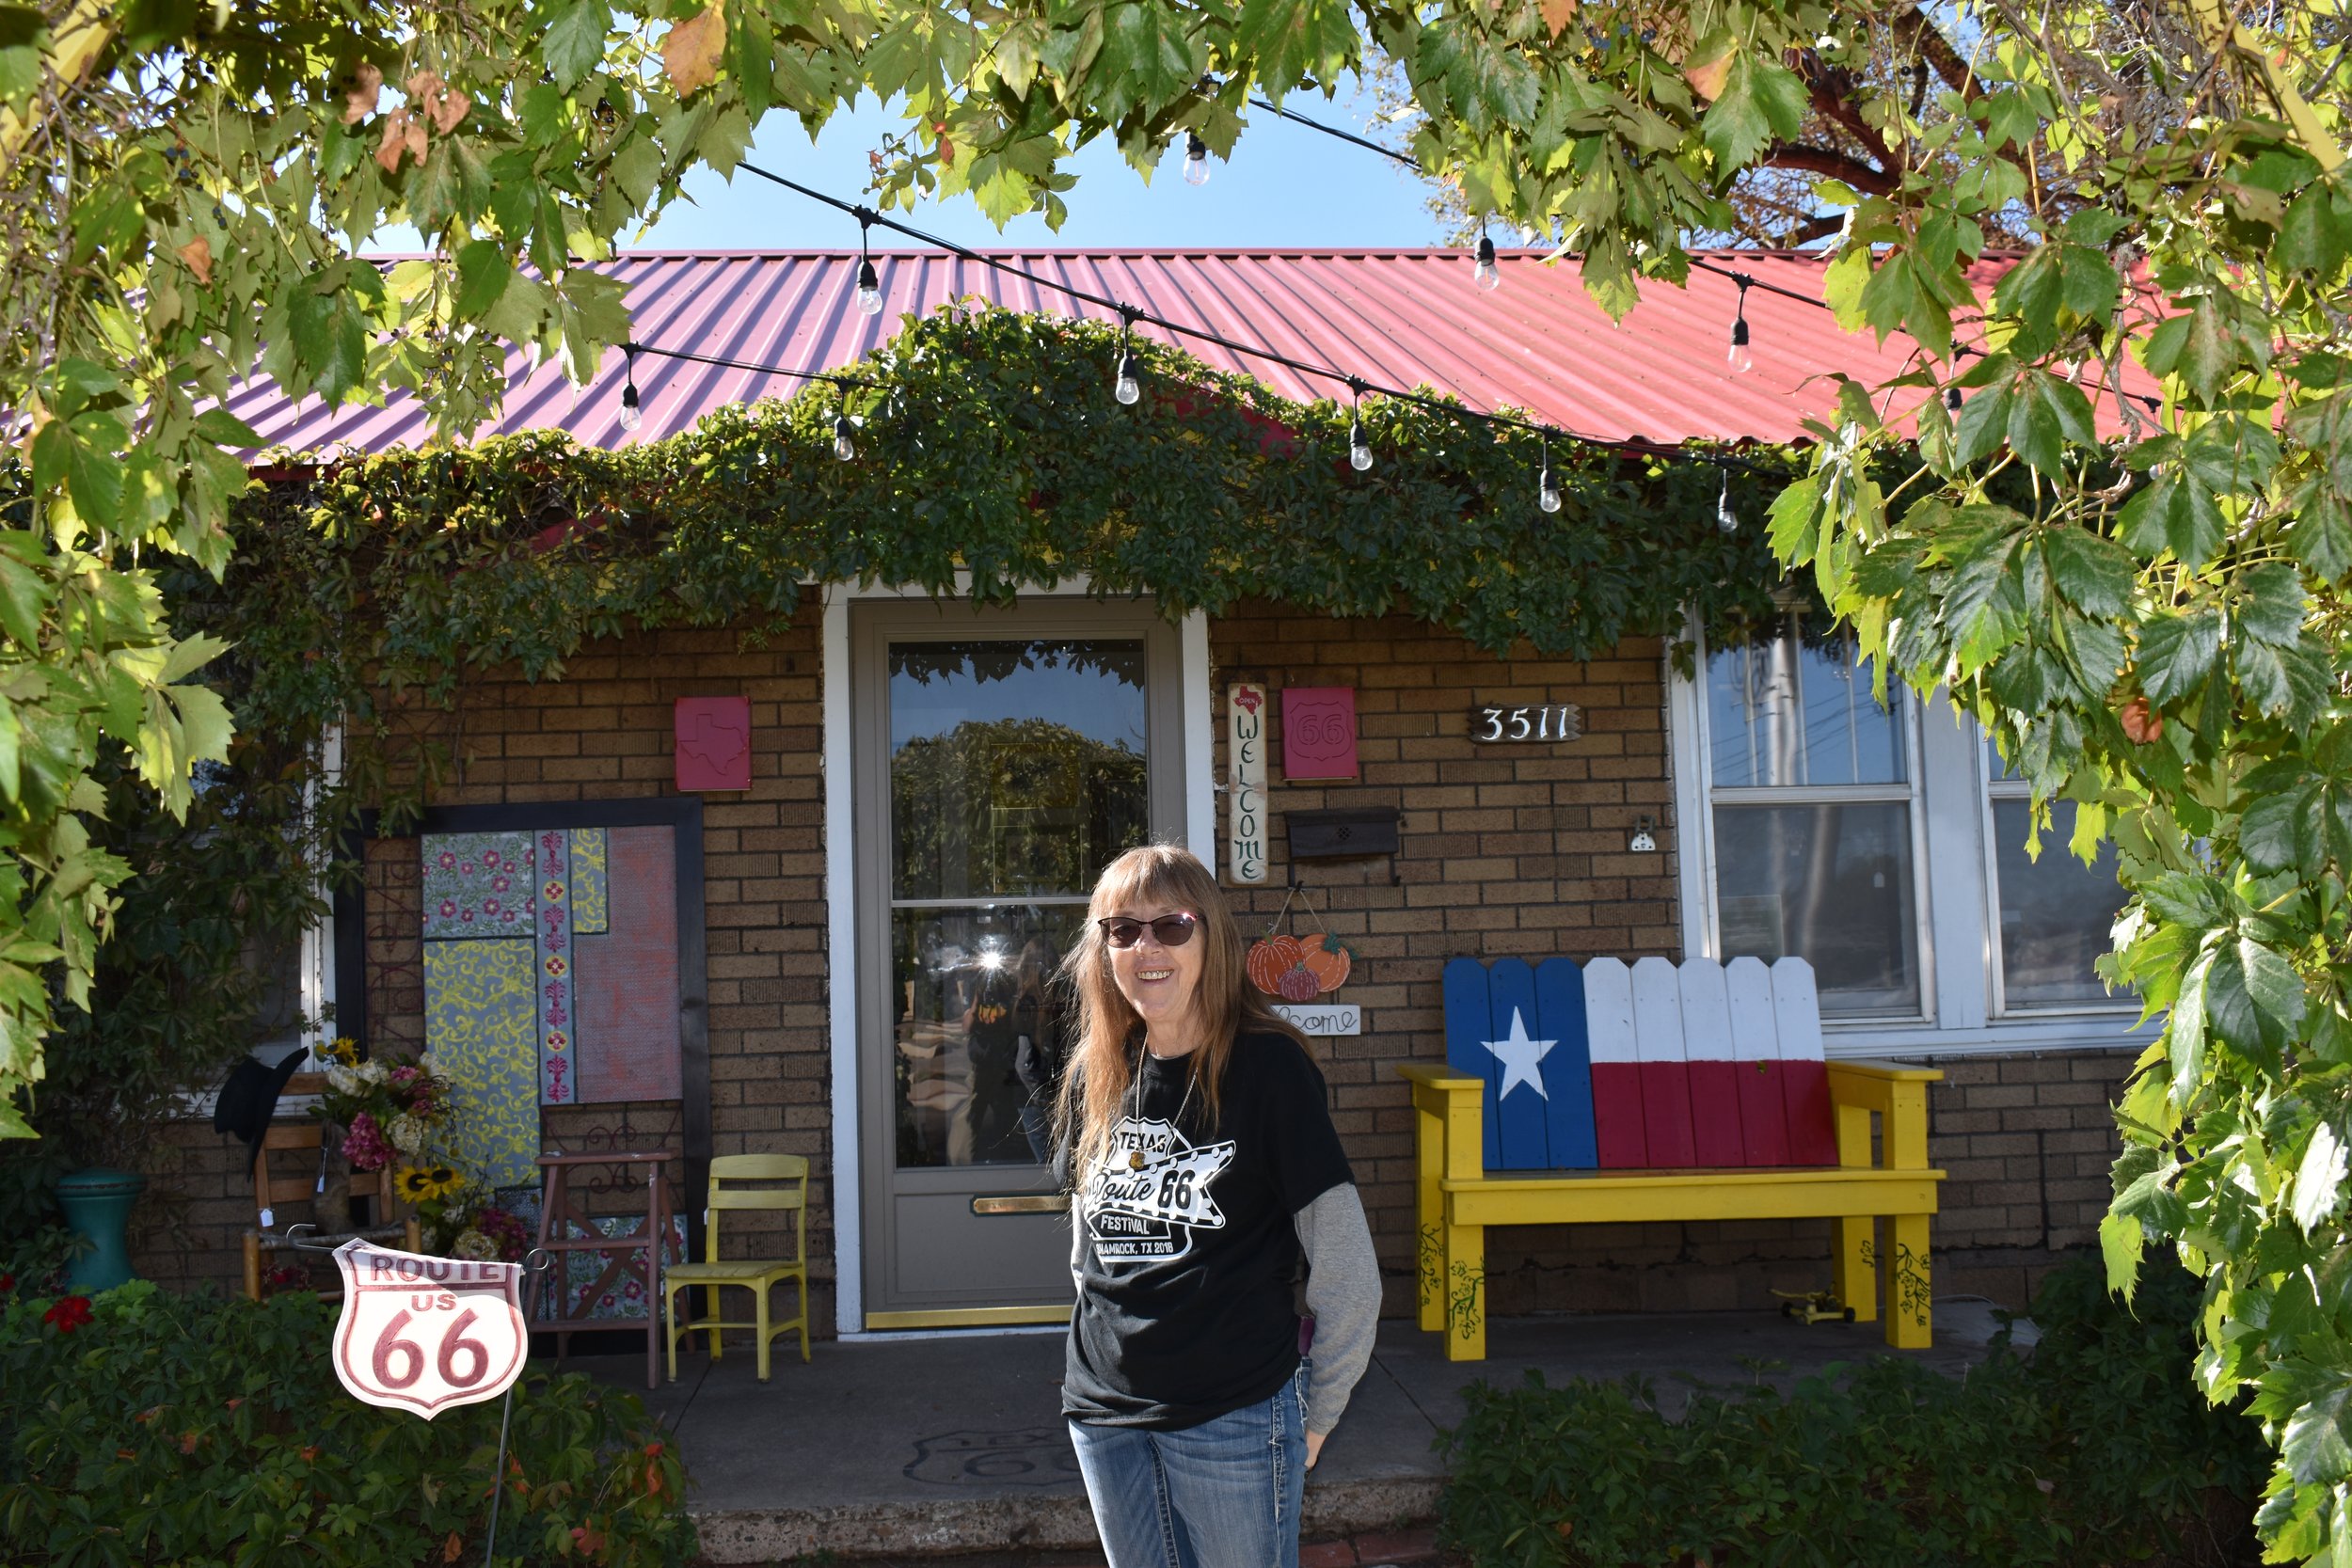  Dora Meroney, pictured here, and her sister  own the Texas Ivy Antiques store on 6th Street (Route 66), Amarillo,.  Dora is Treasurer of Old Route 66 Assn of Texas. 